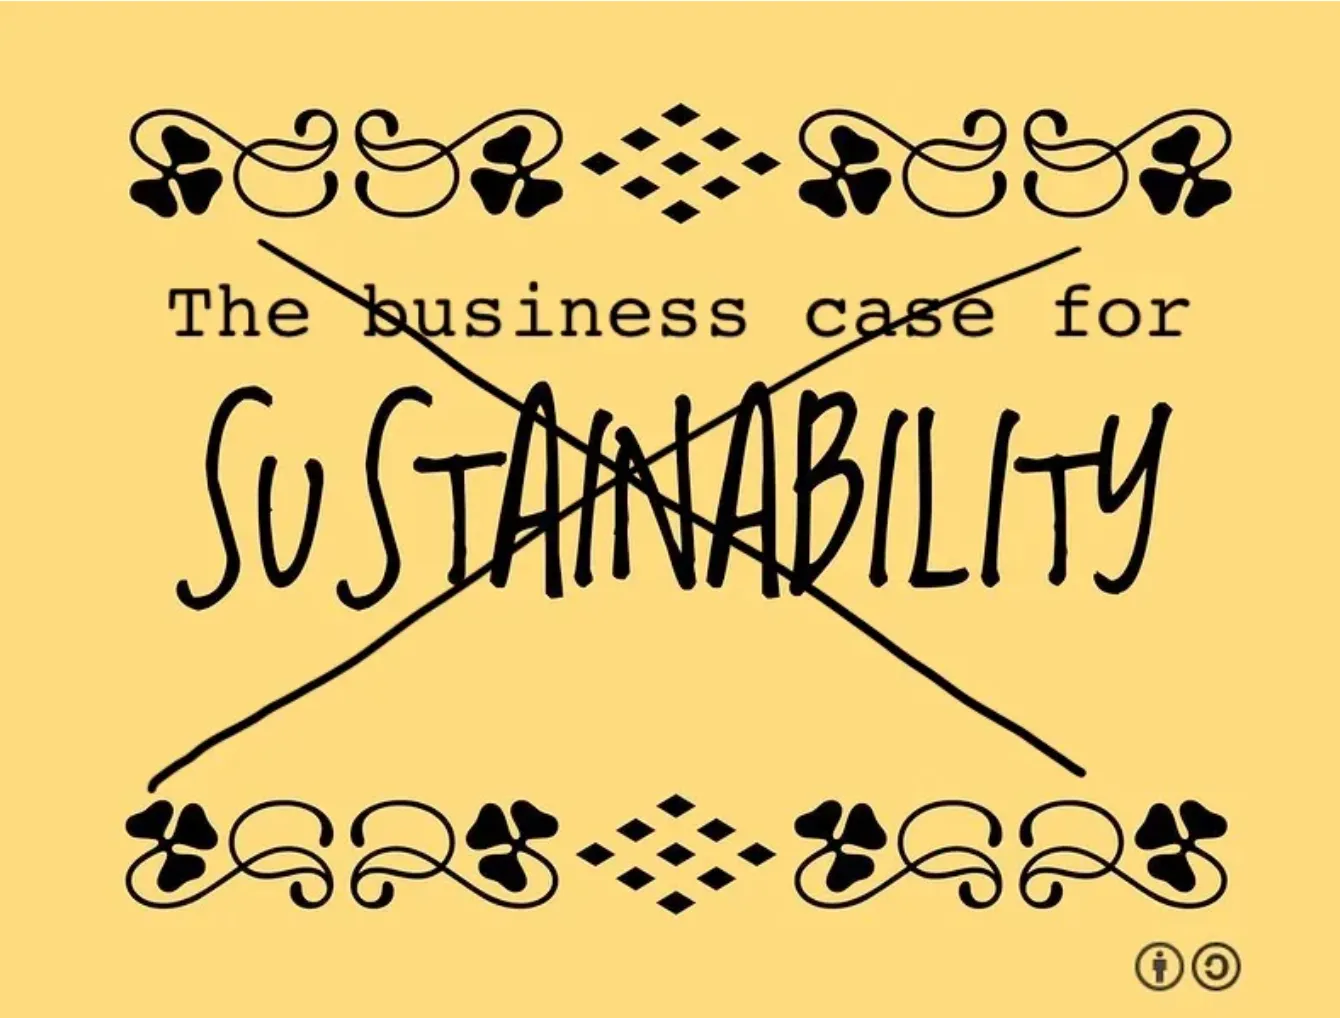 The Business case for sustainability is not working. It is time to focus on the Customer case